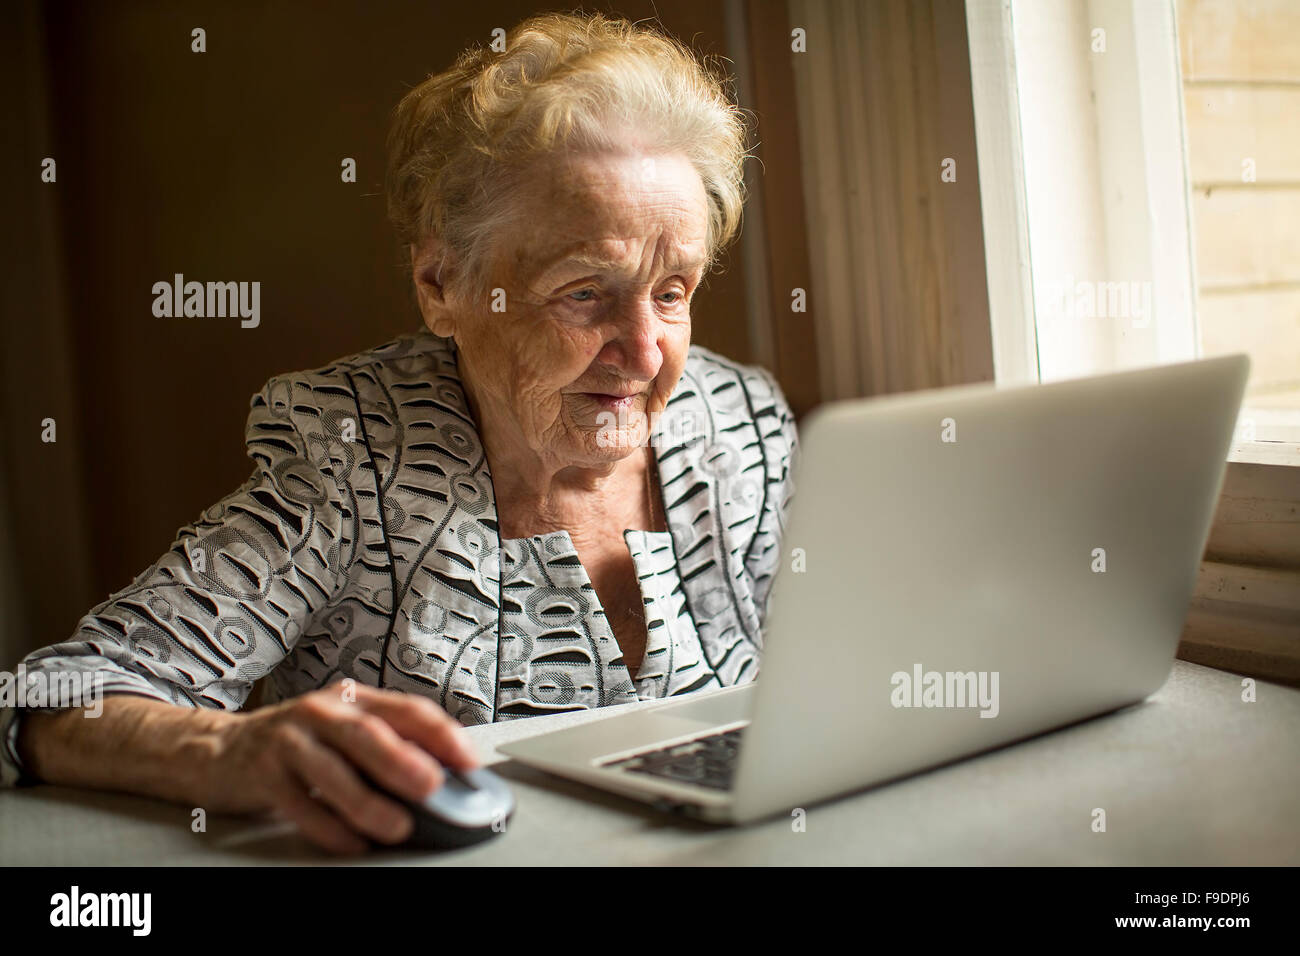 An elderly woman works on a computer. Stock Photo